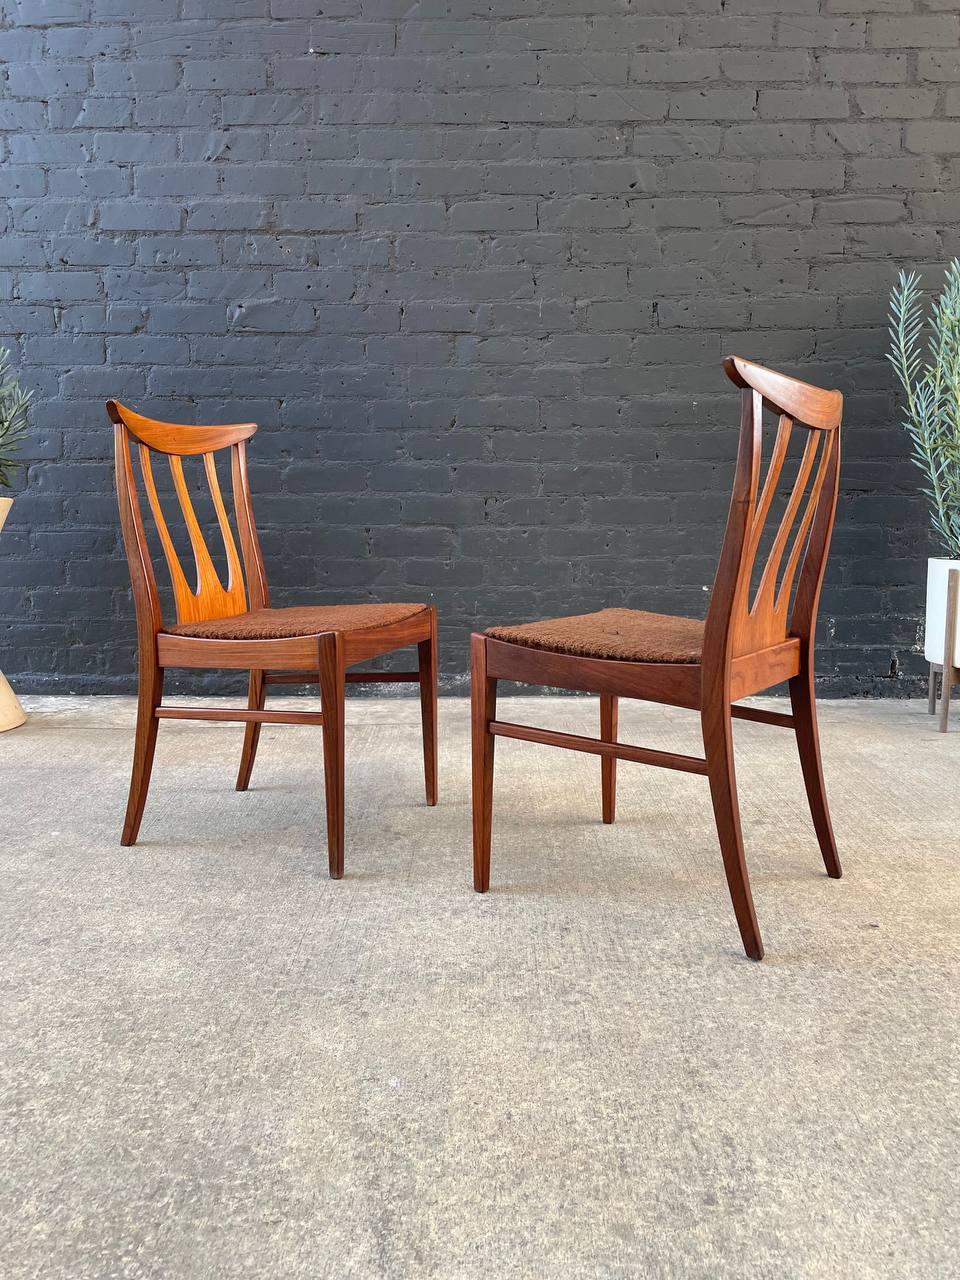 English Set of 6 Mid-Century Modern “Brasilia” Sculpted Teak Dining Chairs by G-Plan